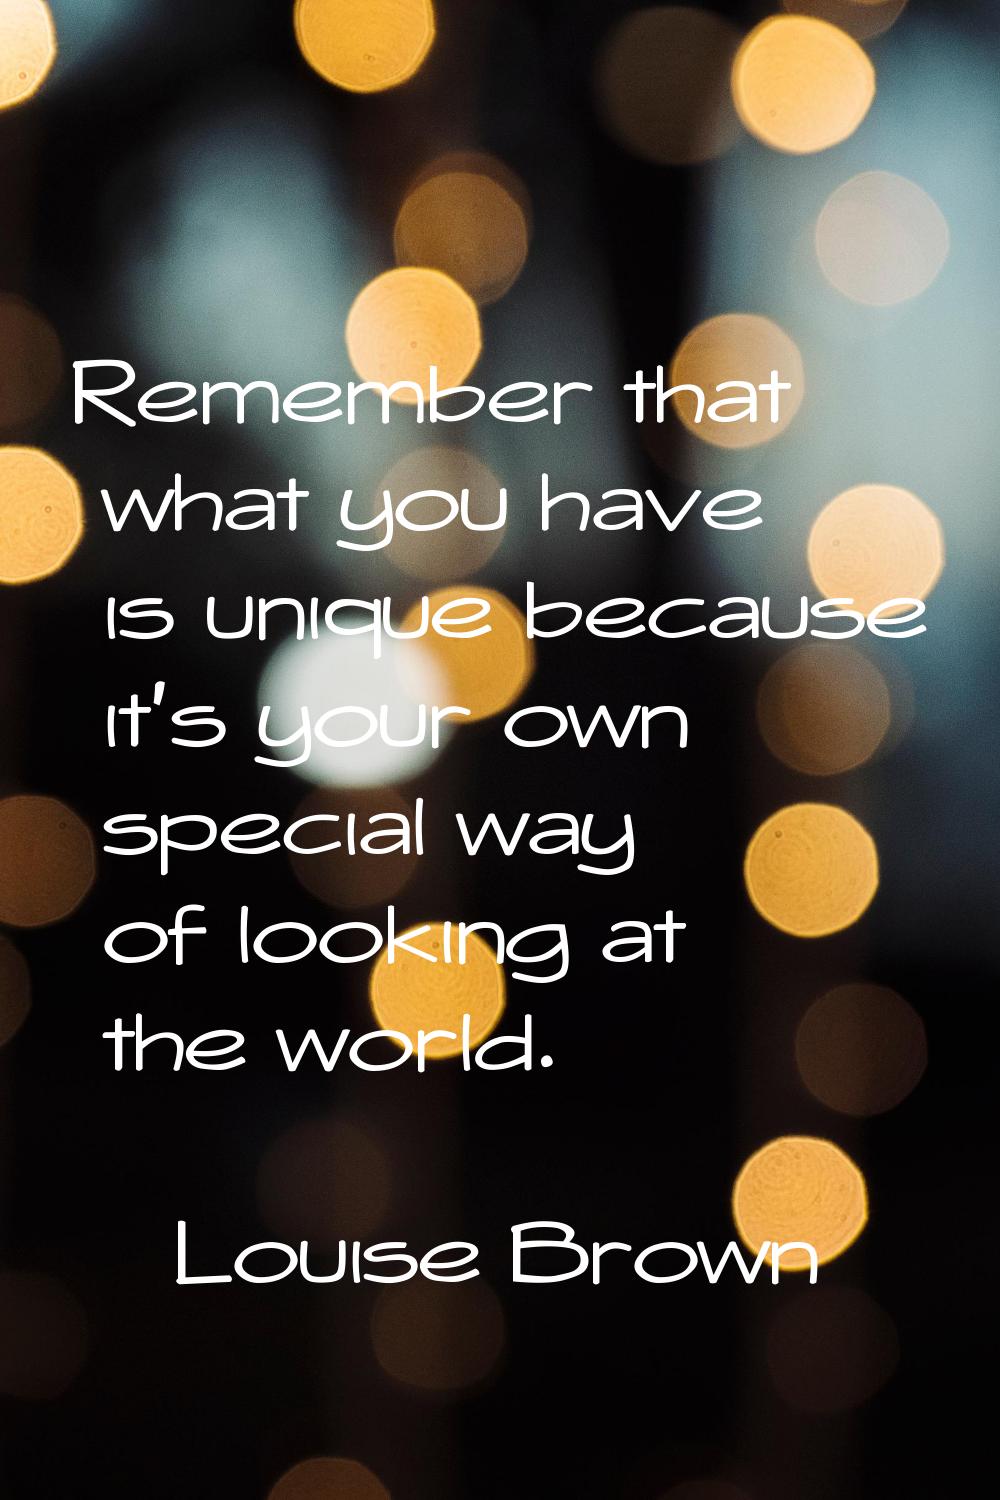 Remember that what you have is unique because it's your own special way of looking at the world.